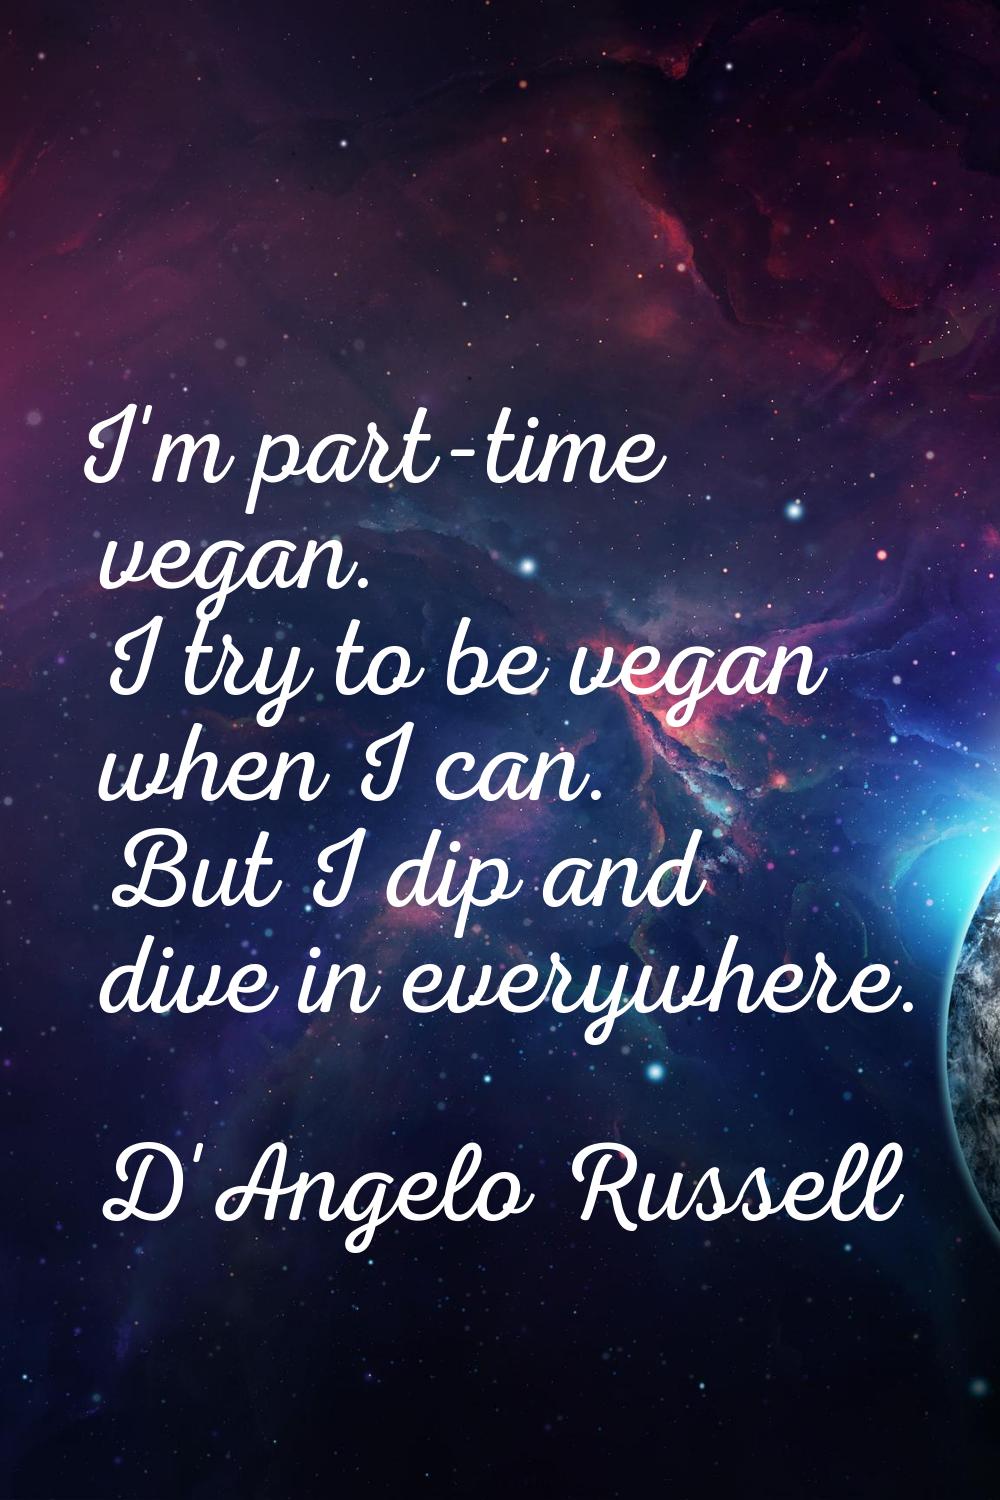 I'm part-time vegan. I try to be vegan when I can. But I dip and dive in everywhere.